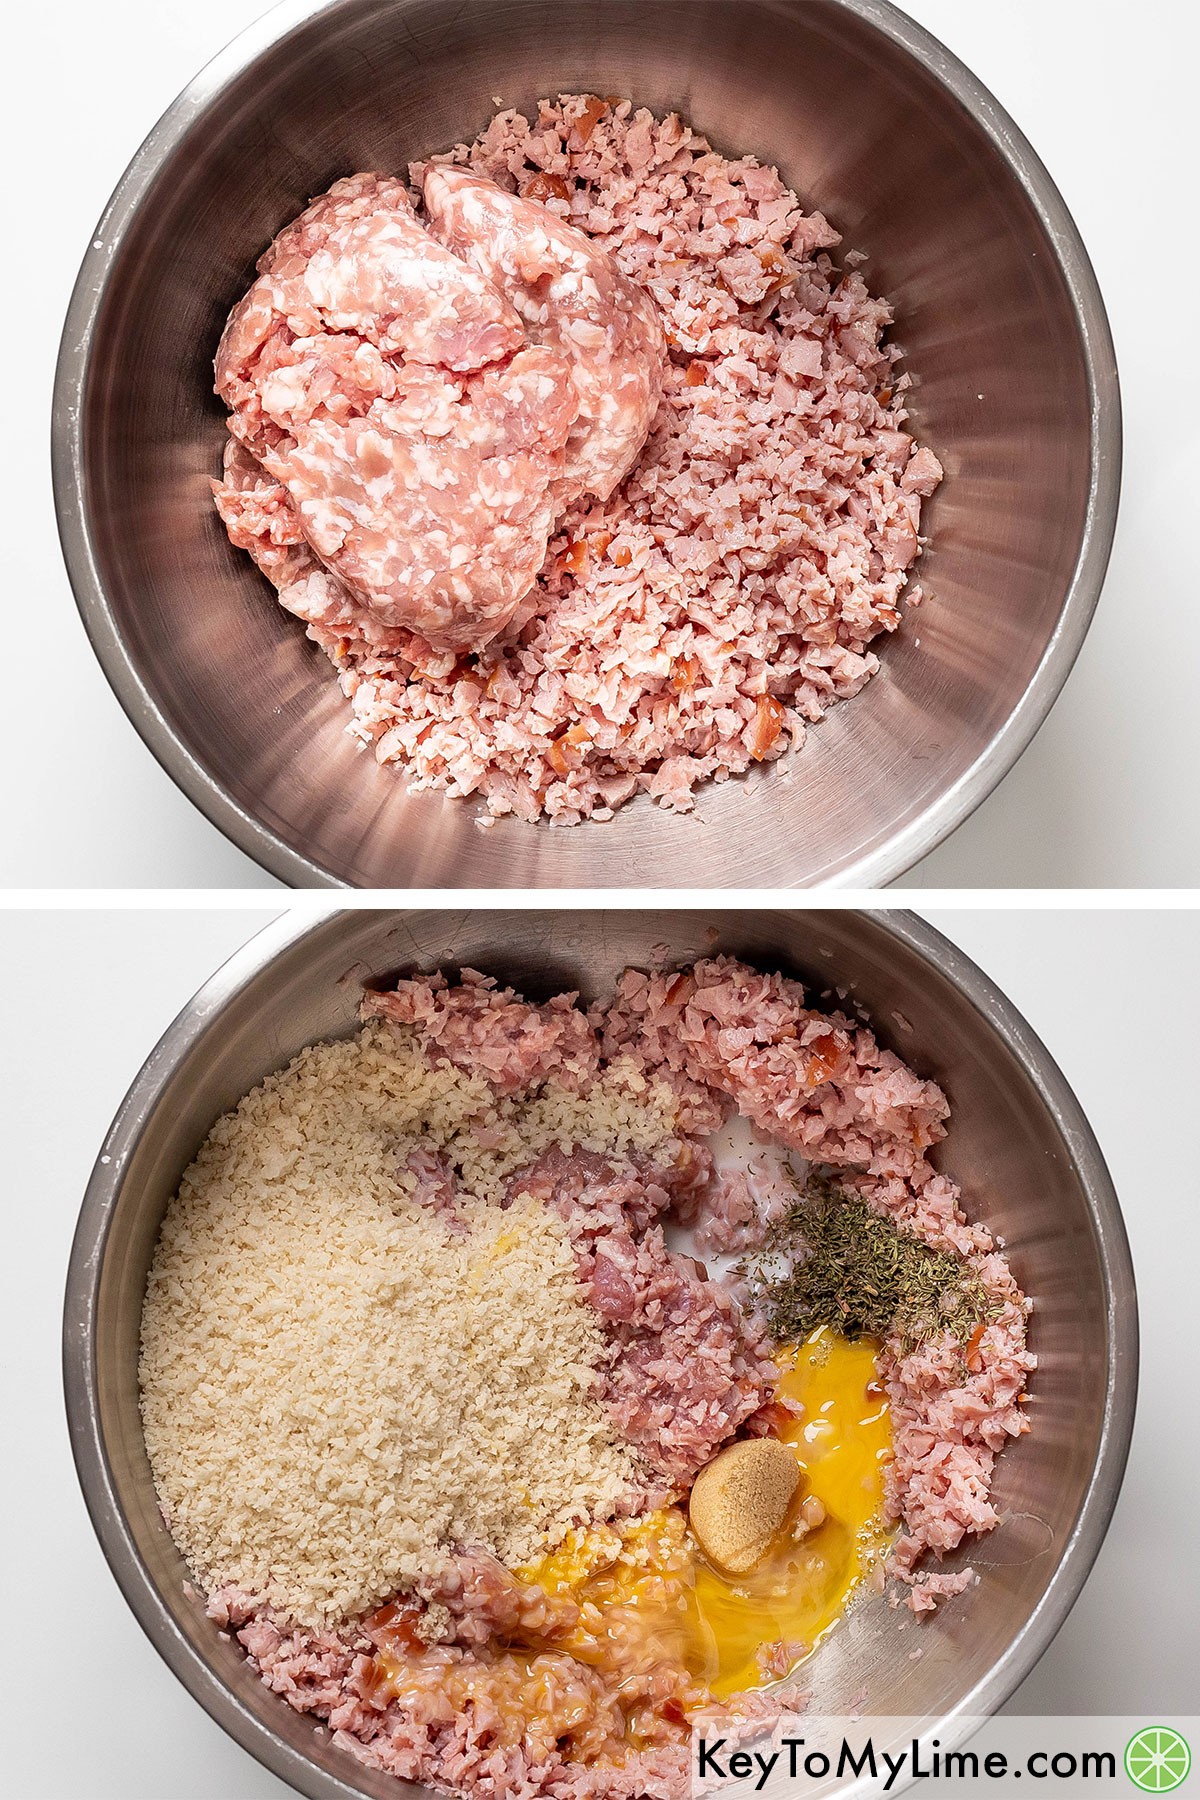 Mixing the processed ham and ground pork together in a large mixing bowl, and then adding in panko, sugar, thyme, and egg.